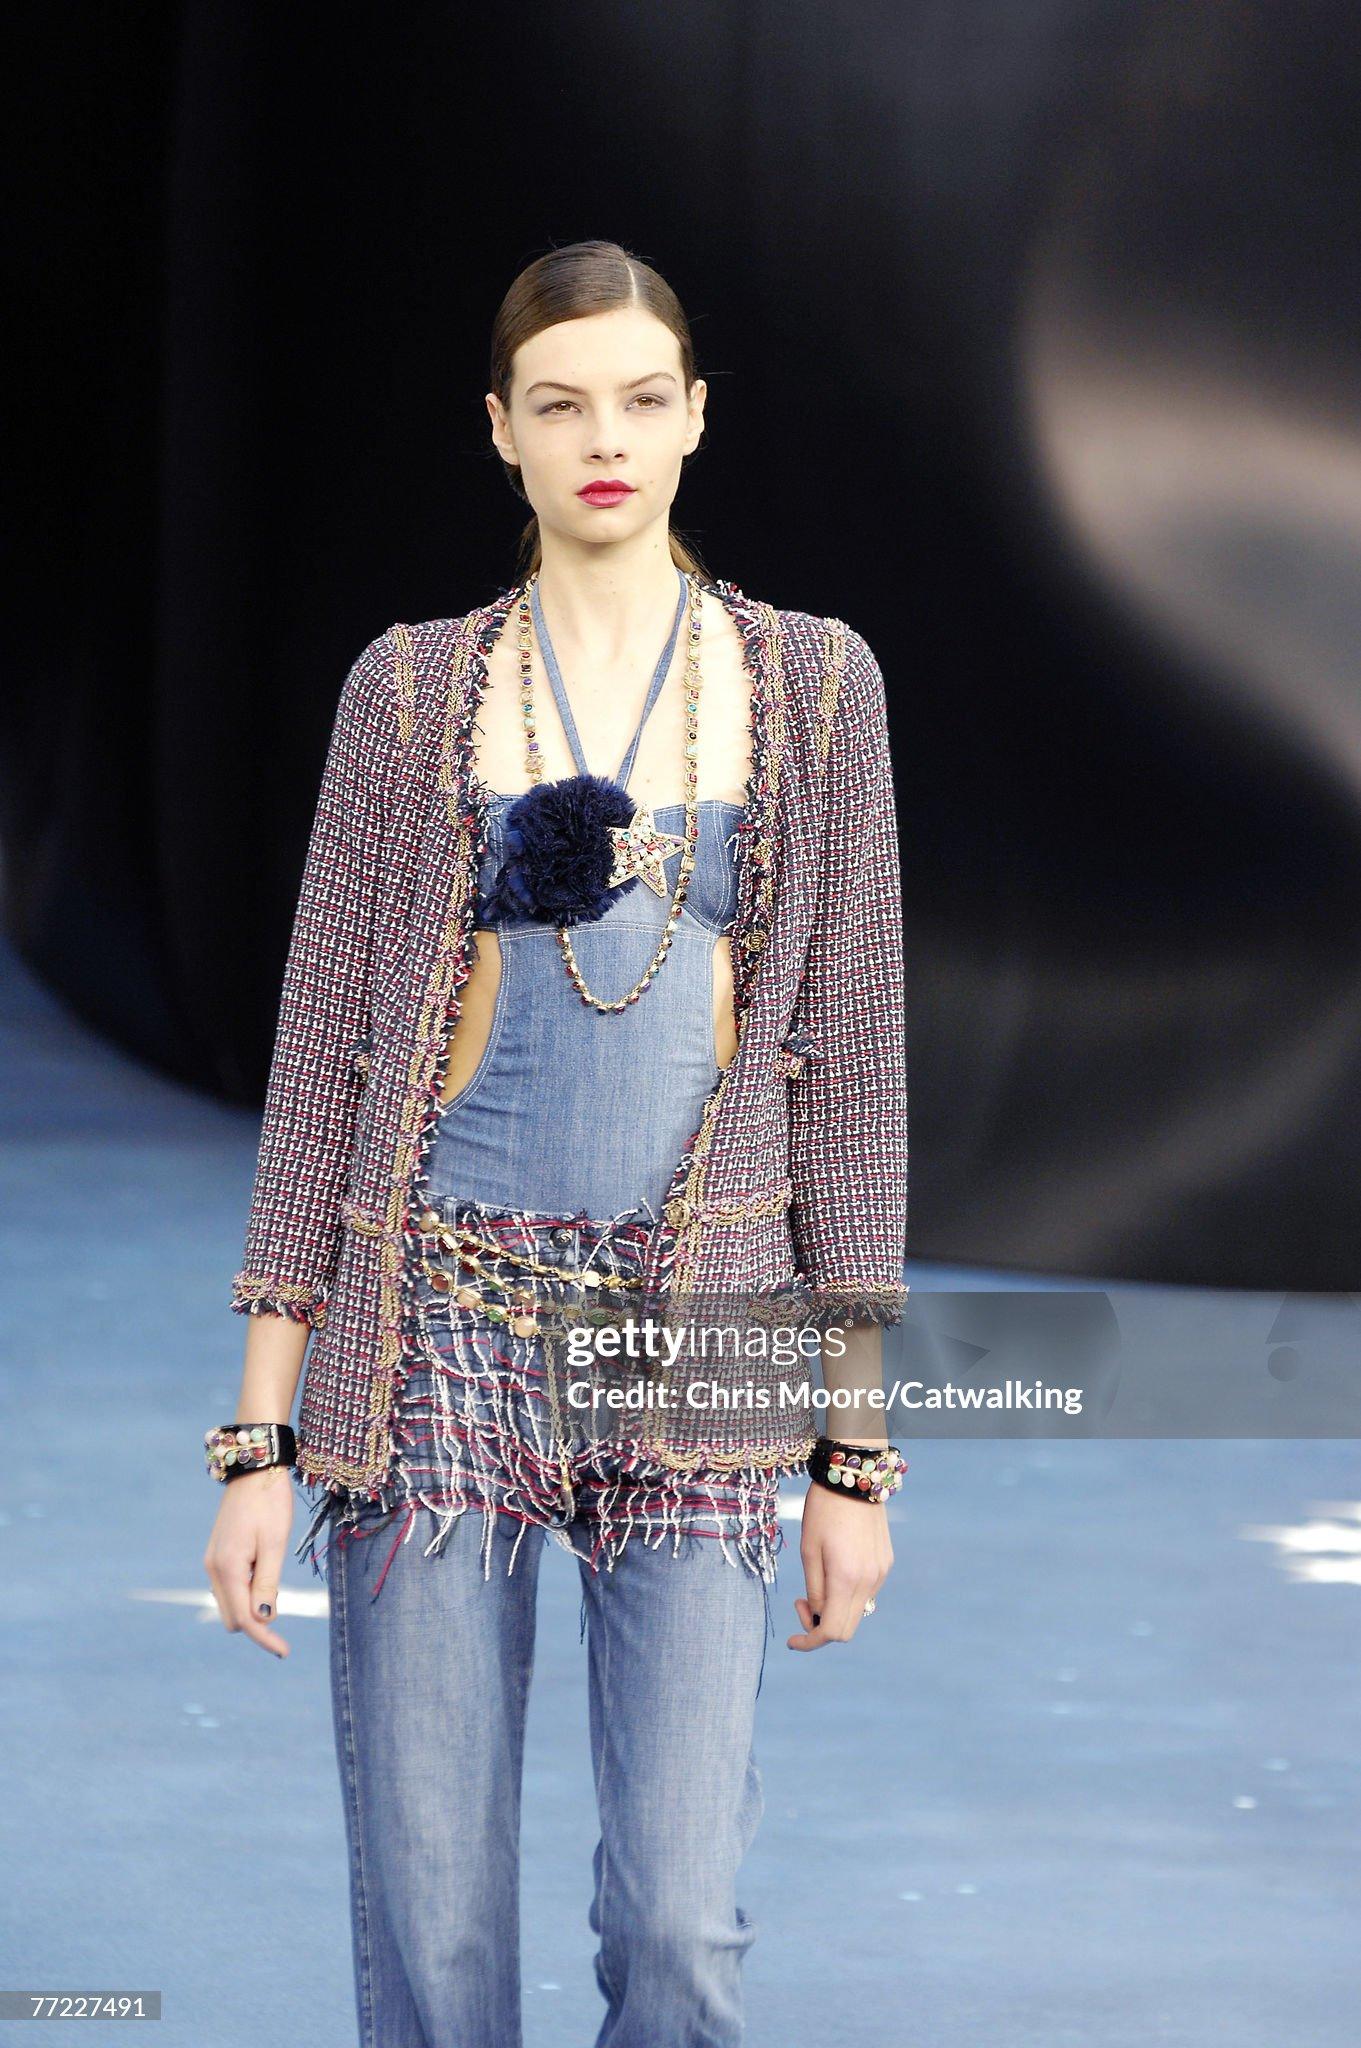 Rarest Chanel blue jeans with tweed accent from Runway of 2008 Spring Collection - as seen on Catwalk!
Size mark 40 FR. Condition: pristine, kept unworn.